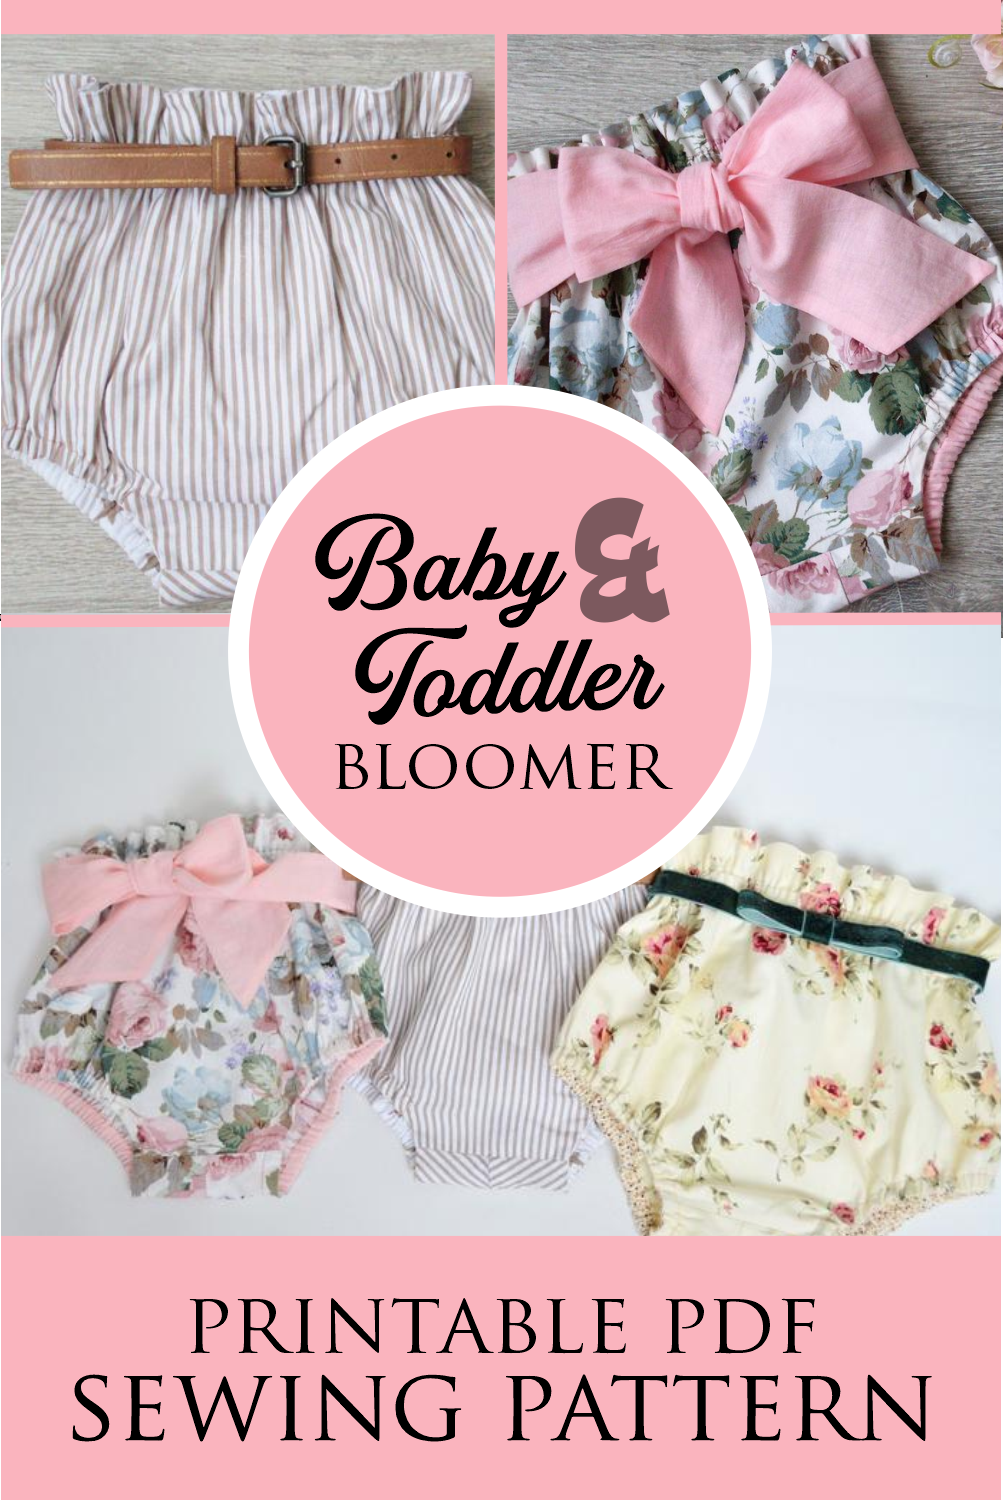 Baby Bloomers Sewing Pattern | DIY Diaper Cover Tutorial - Baby Bloomers Sewing Pattern | DIY Diaper Cover Tutorial -   17 diy Baby sewing ideas